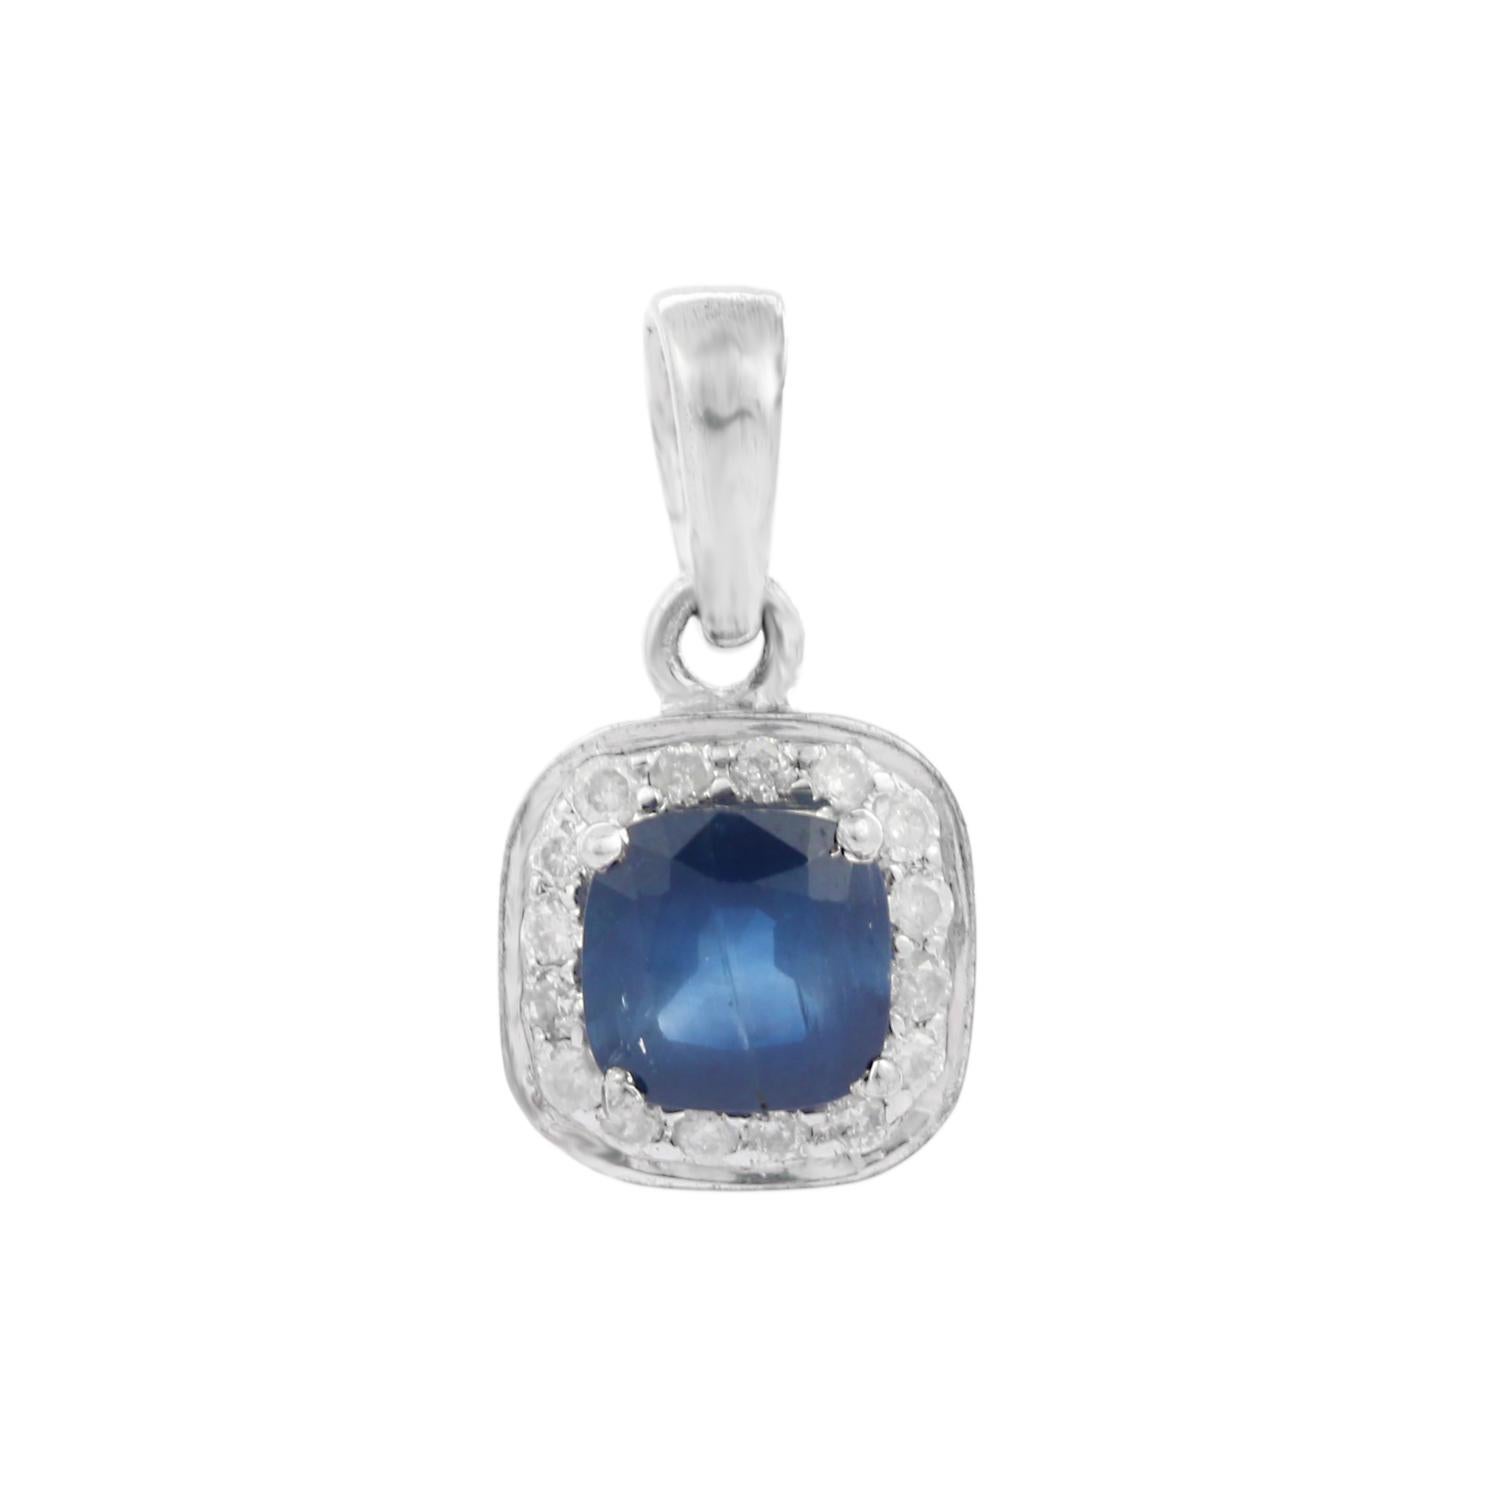 Natural Blue Sapphire Diamond pendant in 18K Gold. It has square cut sapphire studded with diamonds that completes your look with a decent touch. Pendants are used to wear or gifted to represent love and promises. It's an attractive jewelry piece